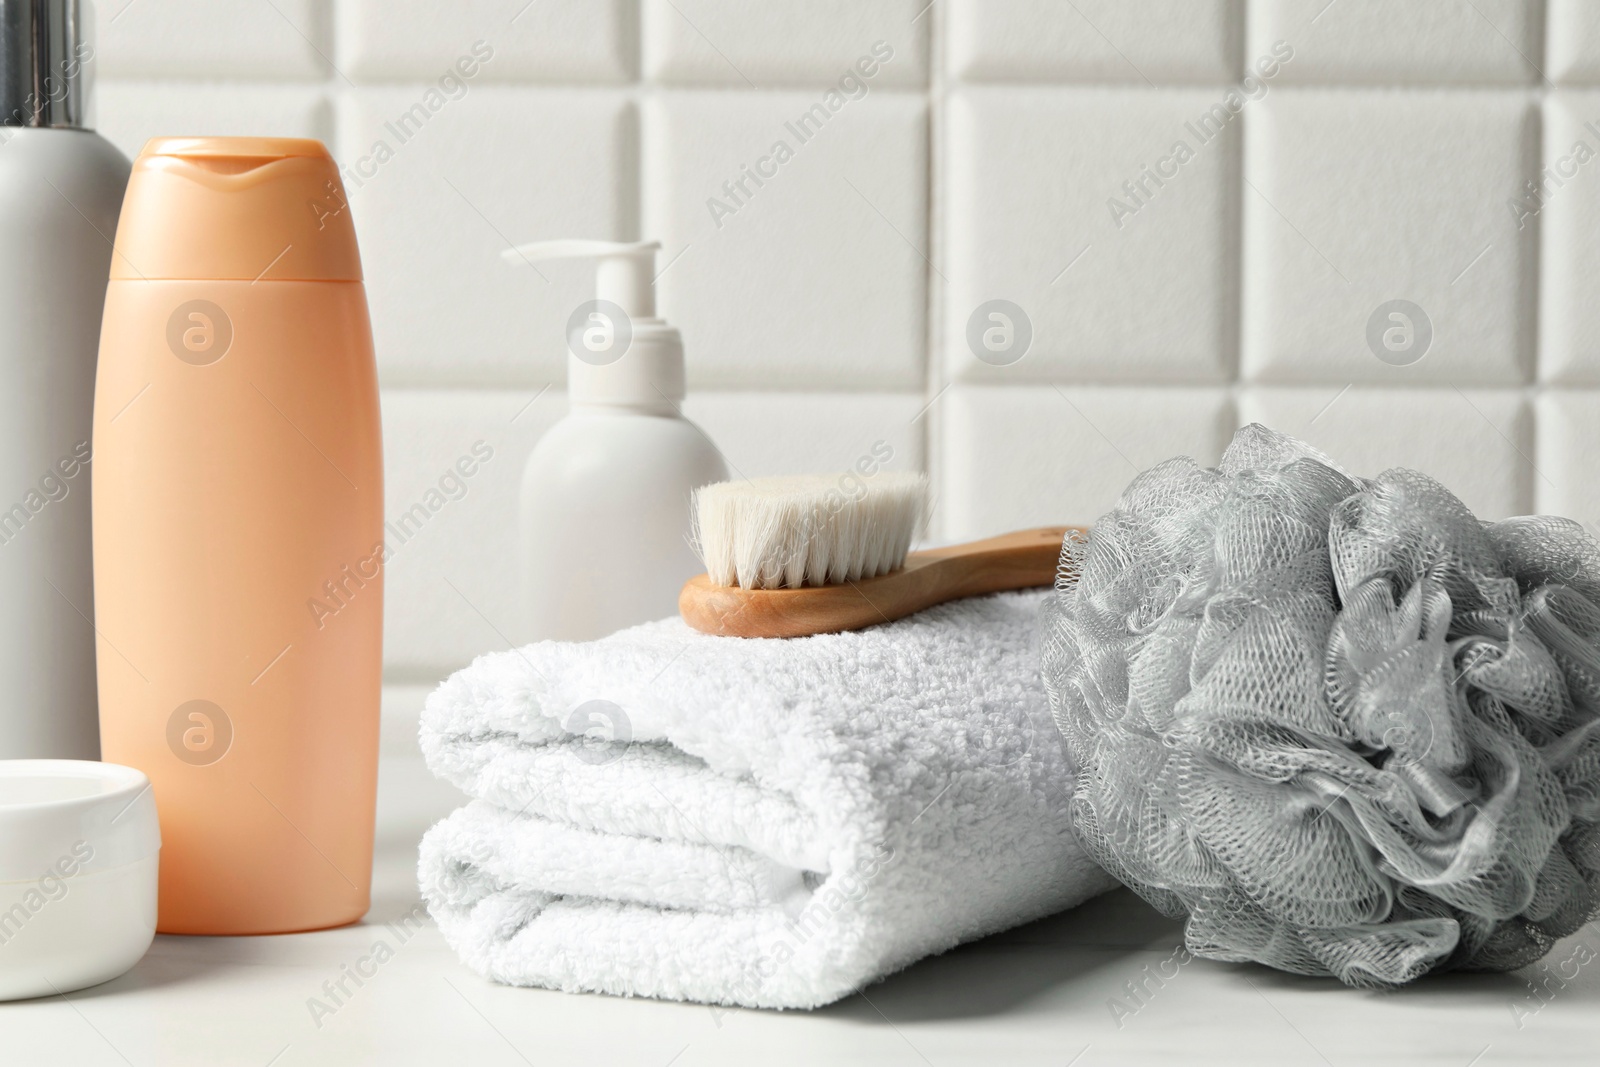 Photo of Bath accessories and personal care products on white table near tiled wall, closeup